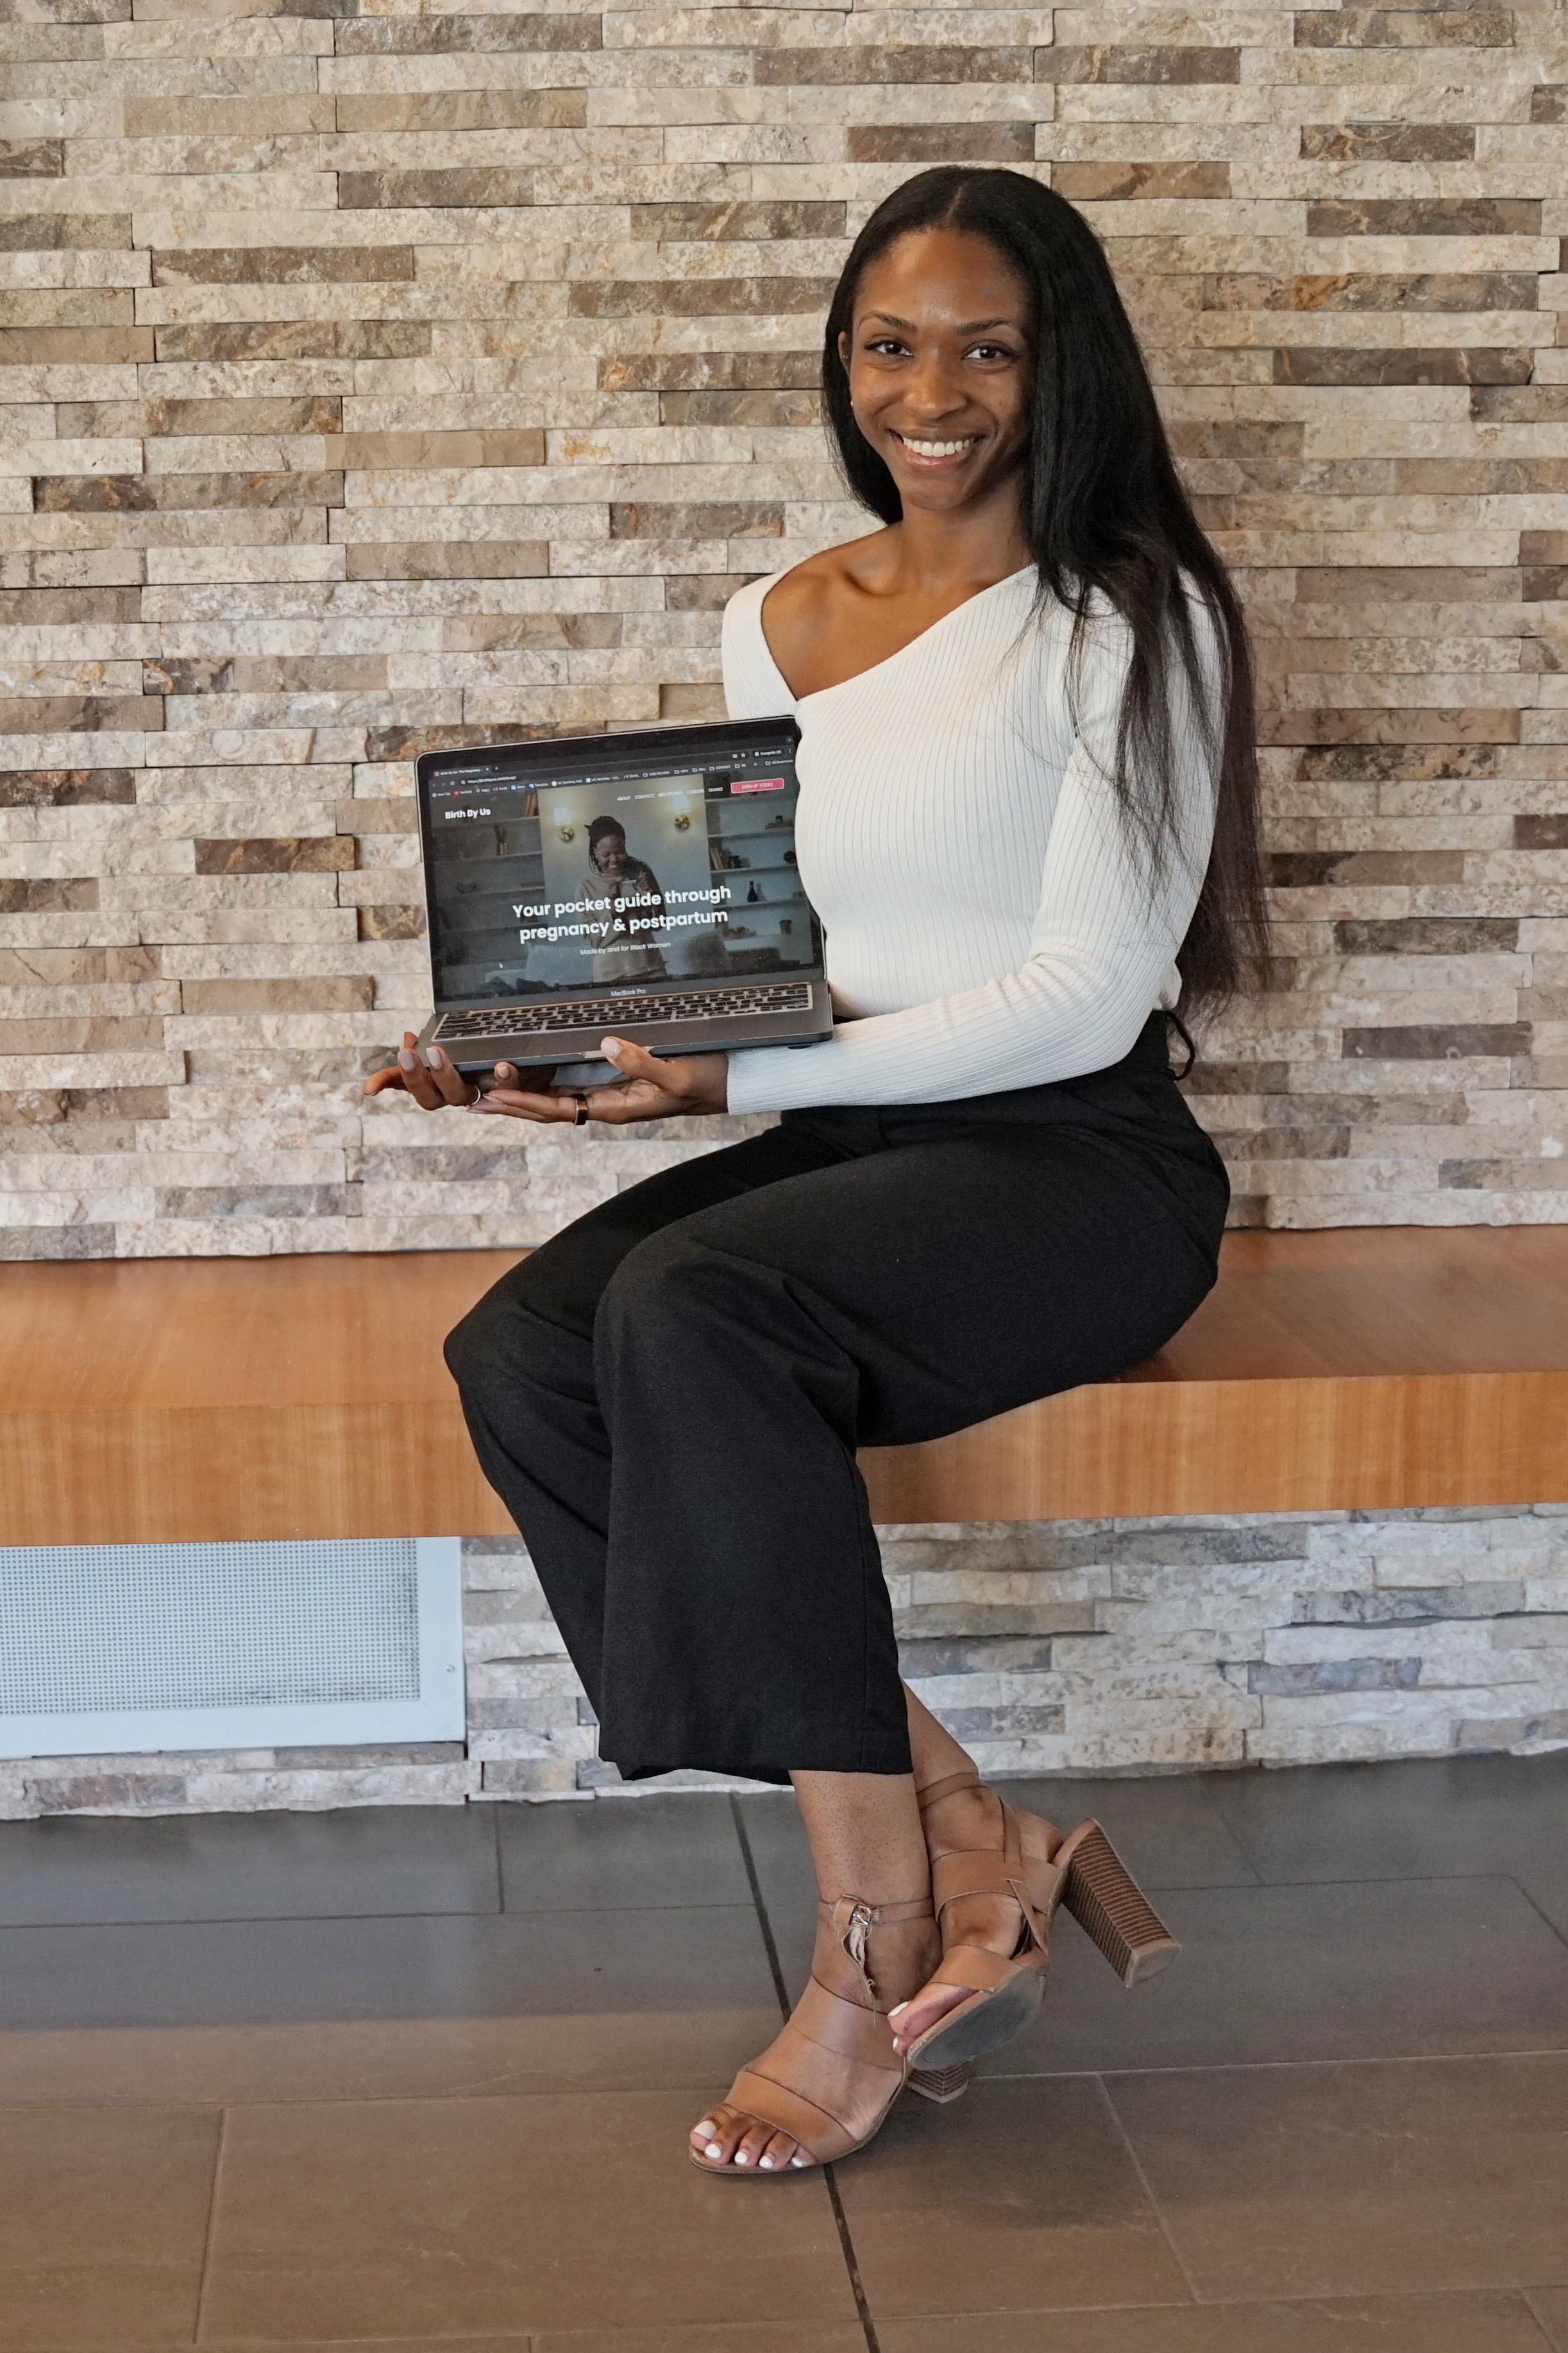 Black woman holds laptop illustrating software. She is pictured in front of a wall wearing a white blouse and black pants